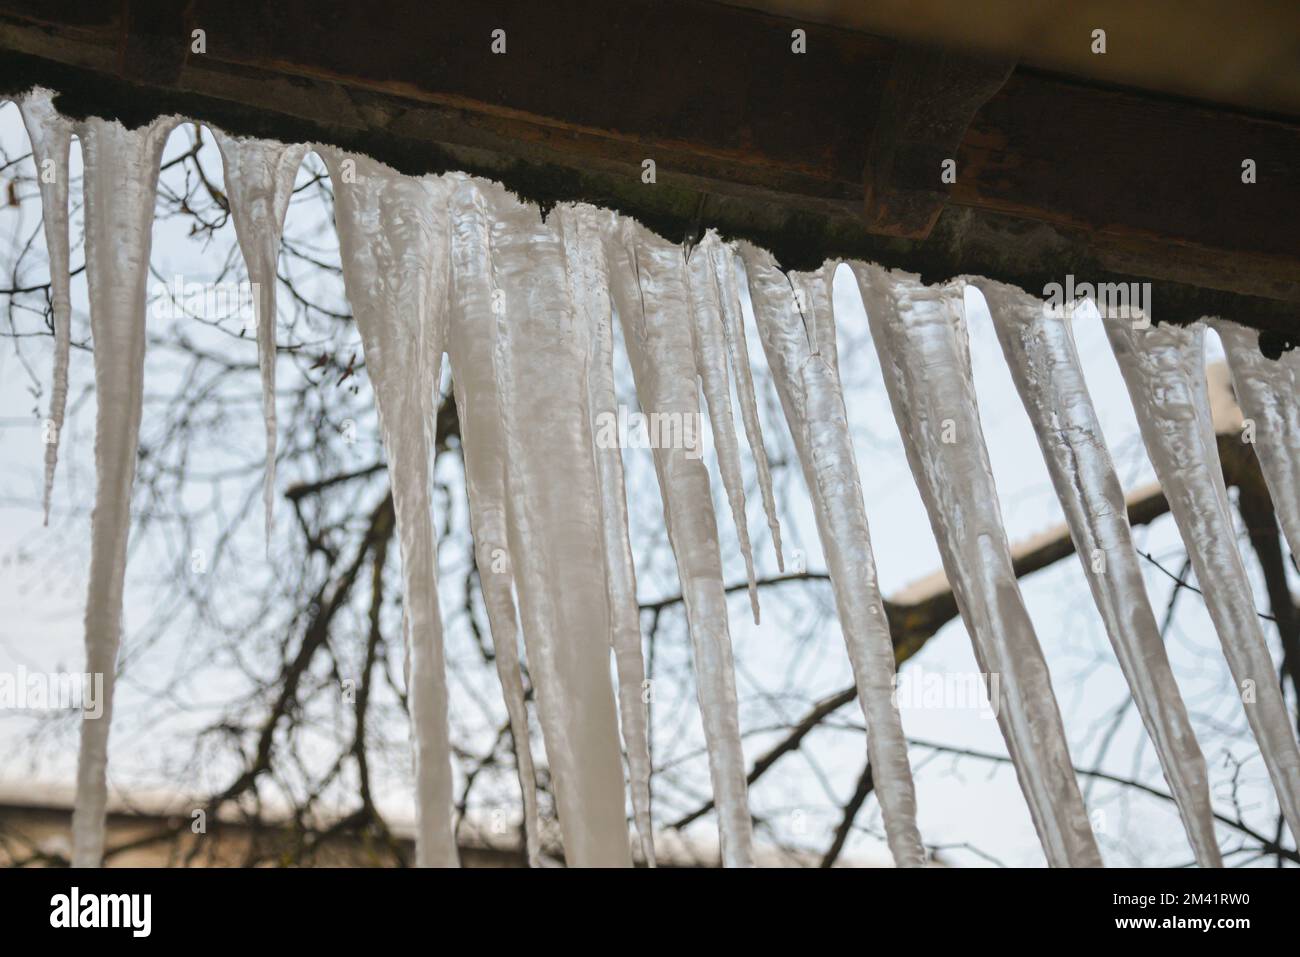 Icicles hanging from the roof against the sky Stock Photo